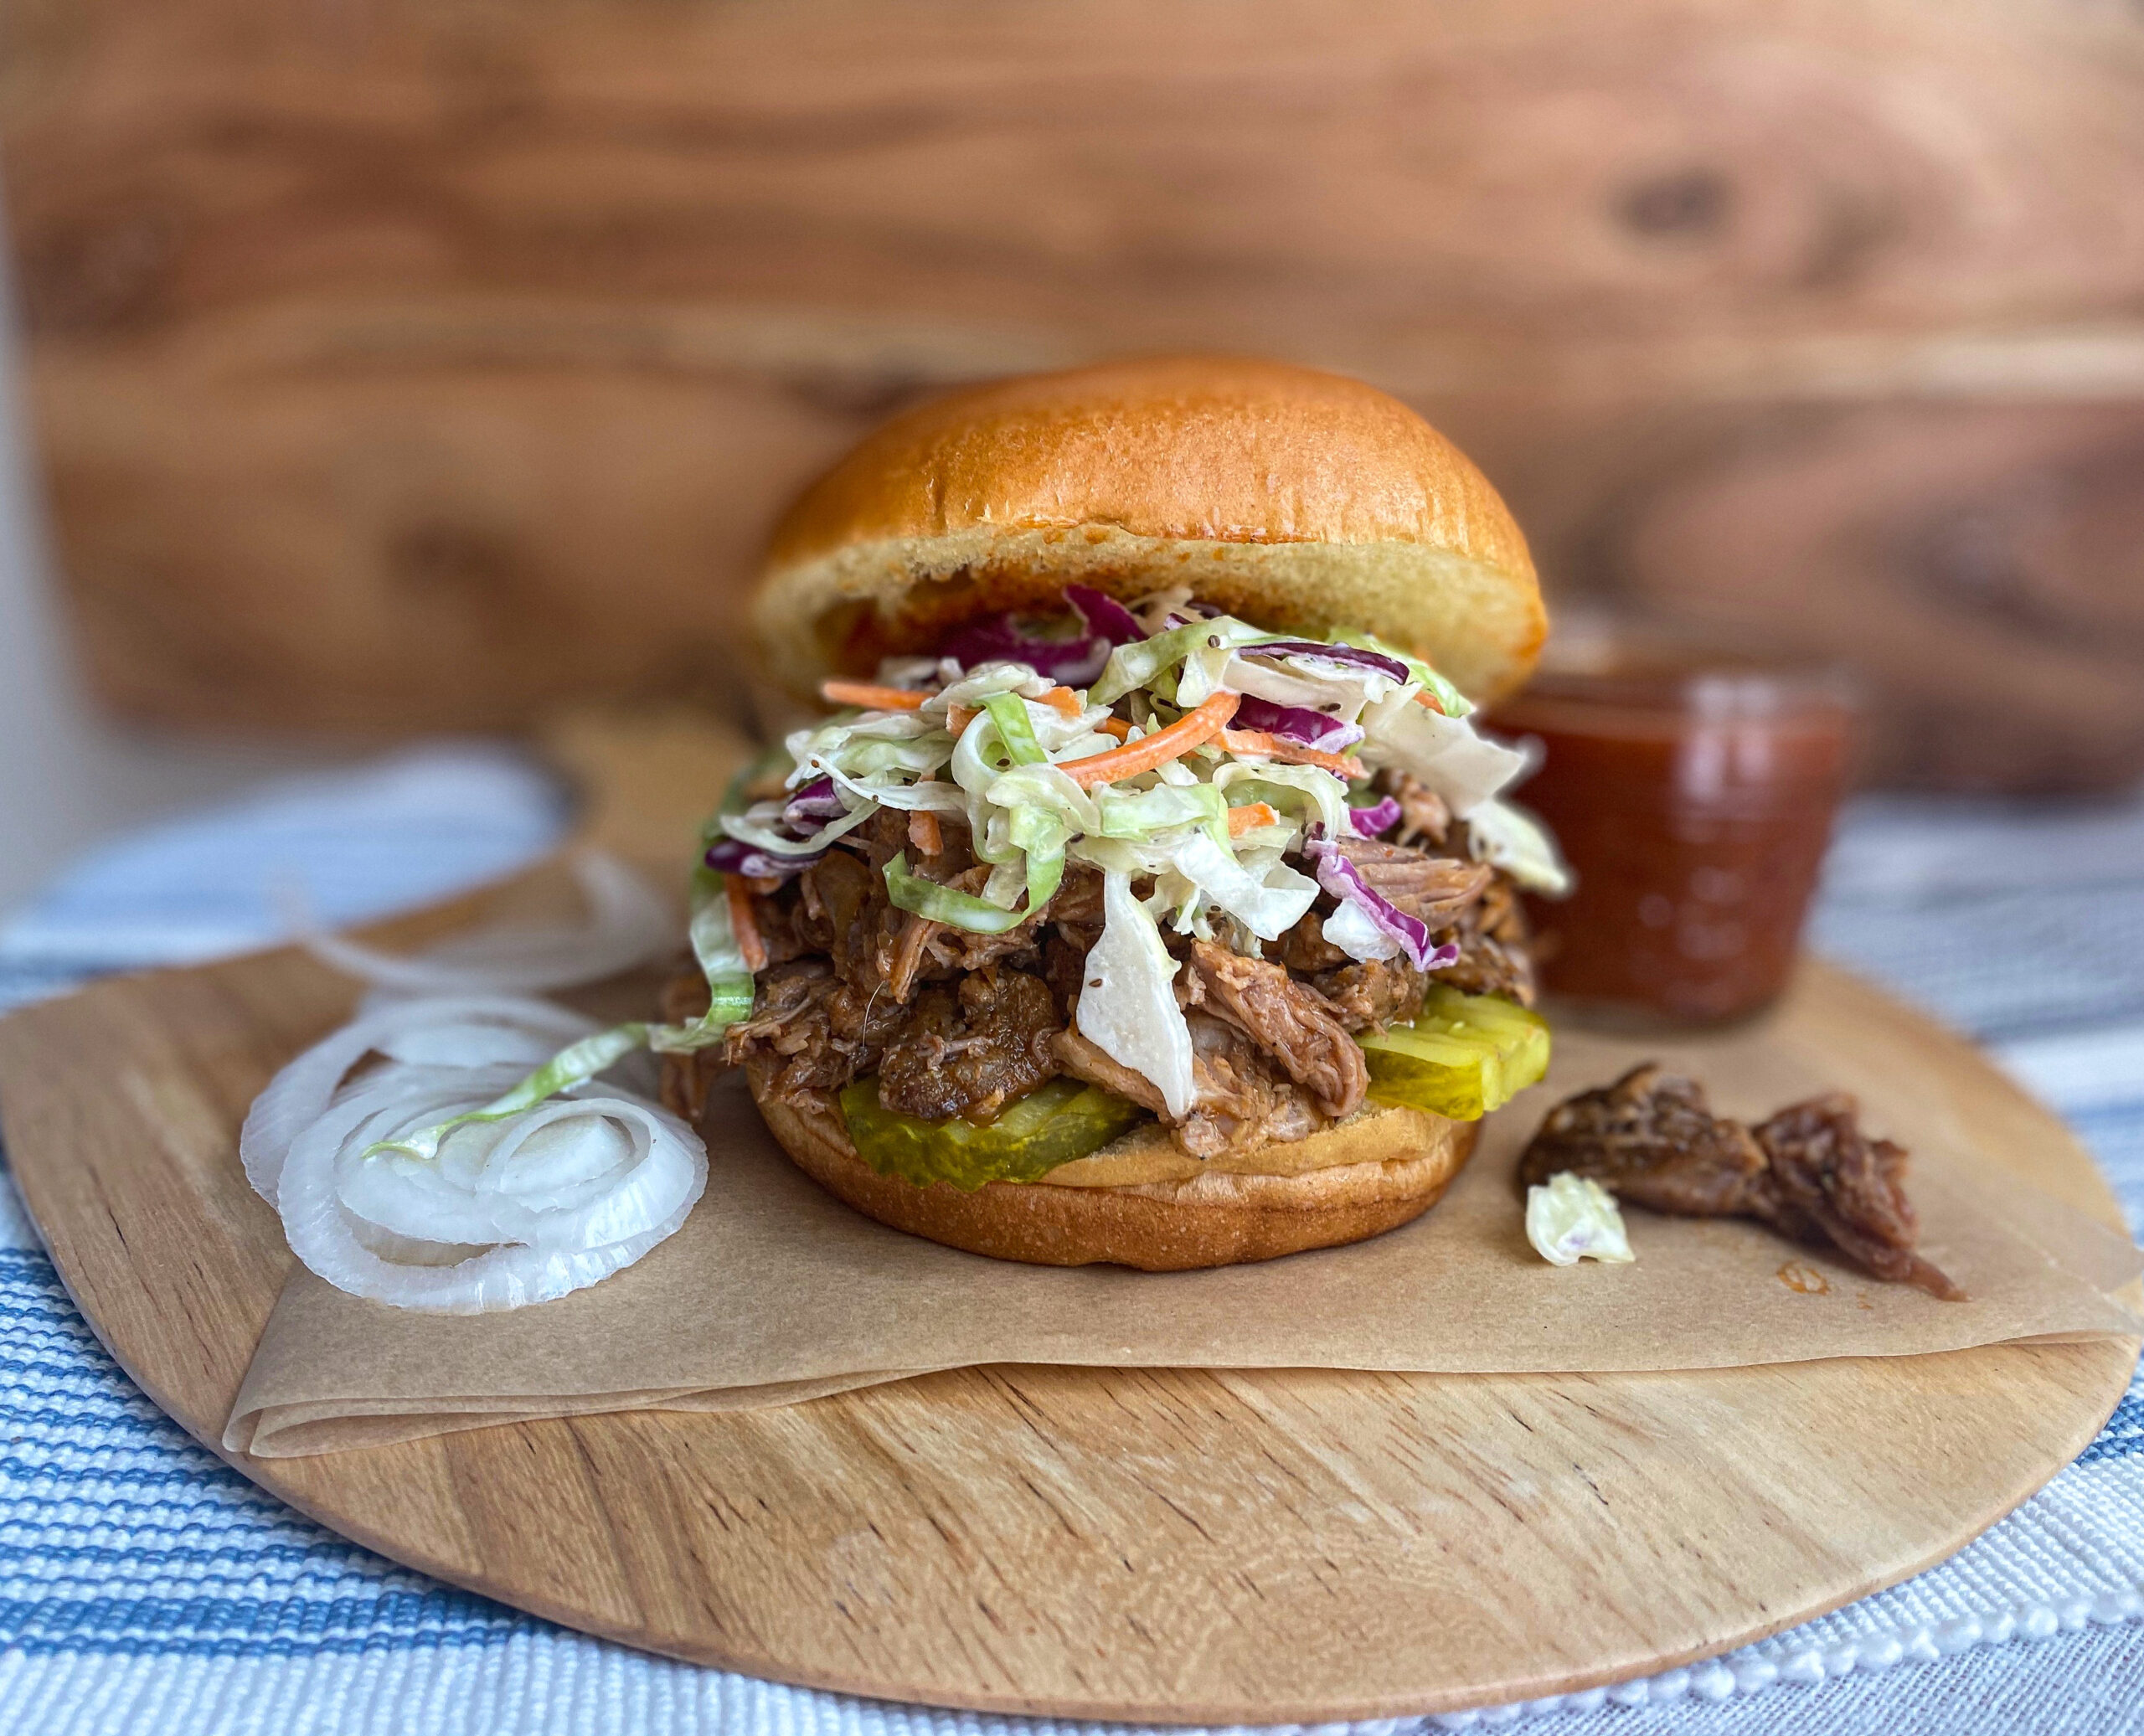 pulled pork sandwiches with homemade BBQ sauce and coleslaw on brioche bun slow cooker